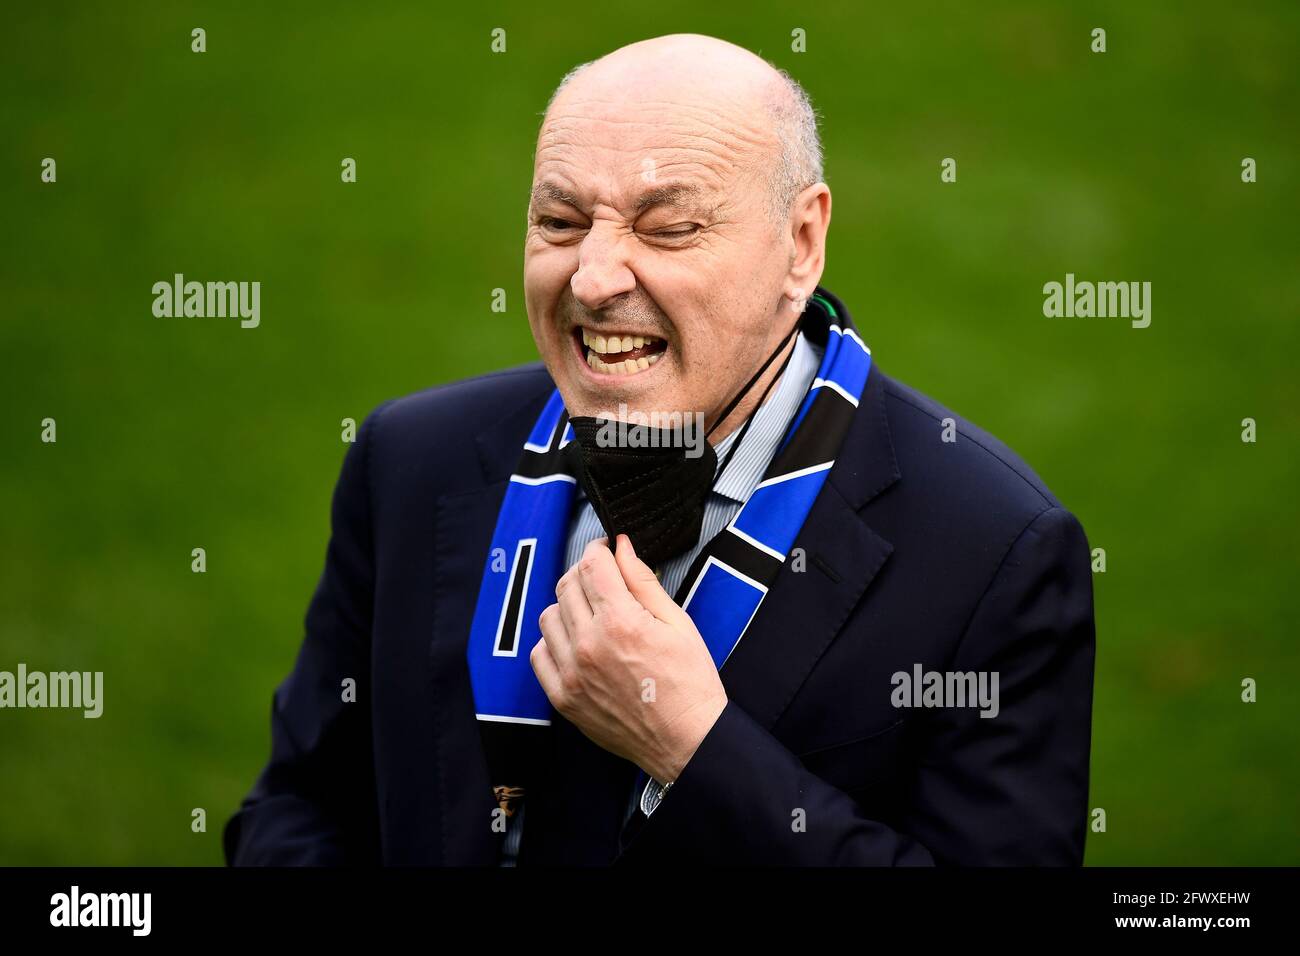 Milan, Italy. 23 May 2021. Giuseppe Marotta, CEO for sport of FC  Internazionale, reacts during the award ceremony after the Serie A football  match between FC Internazionale and Udinese Calcio. FC Internazionale